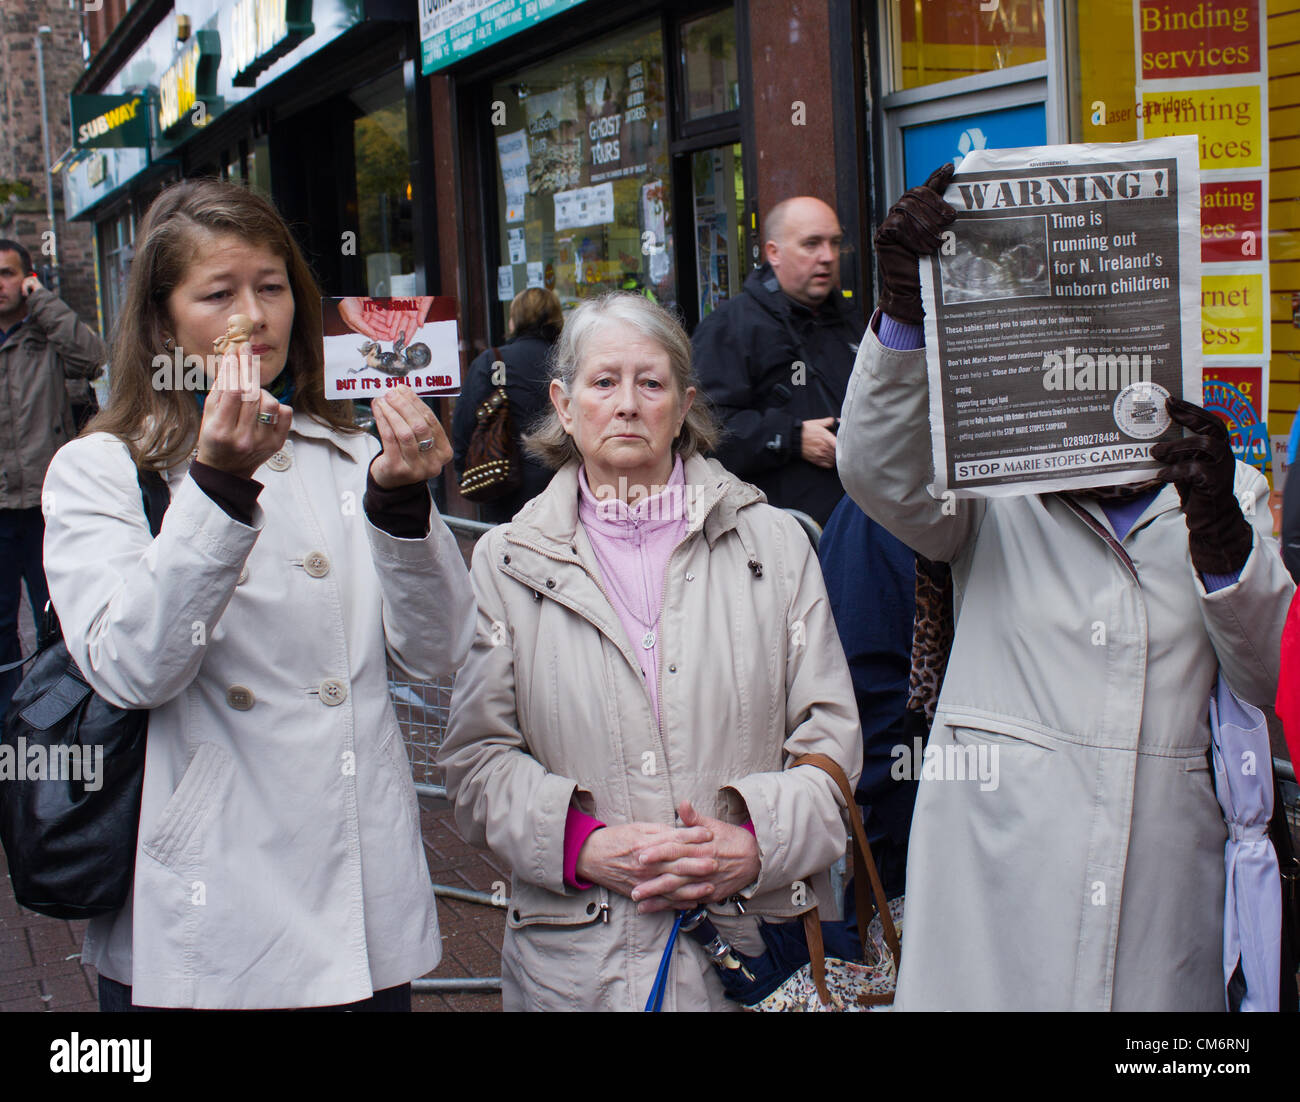 Belfast, UK. 18th October, 2012. Anti-abortion protesters at the opening of the Marie Stopes clinic in Belfast, the first private clinic in Northern ireland to offer abortions. The clinic, which opened today, offers abortions under the law in Northern Ireland. Stock Photo